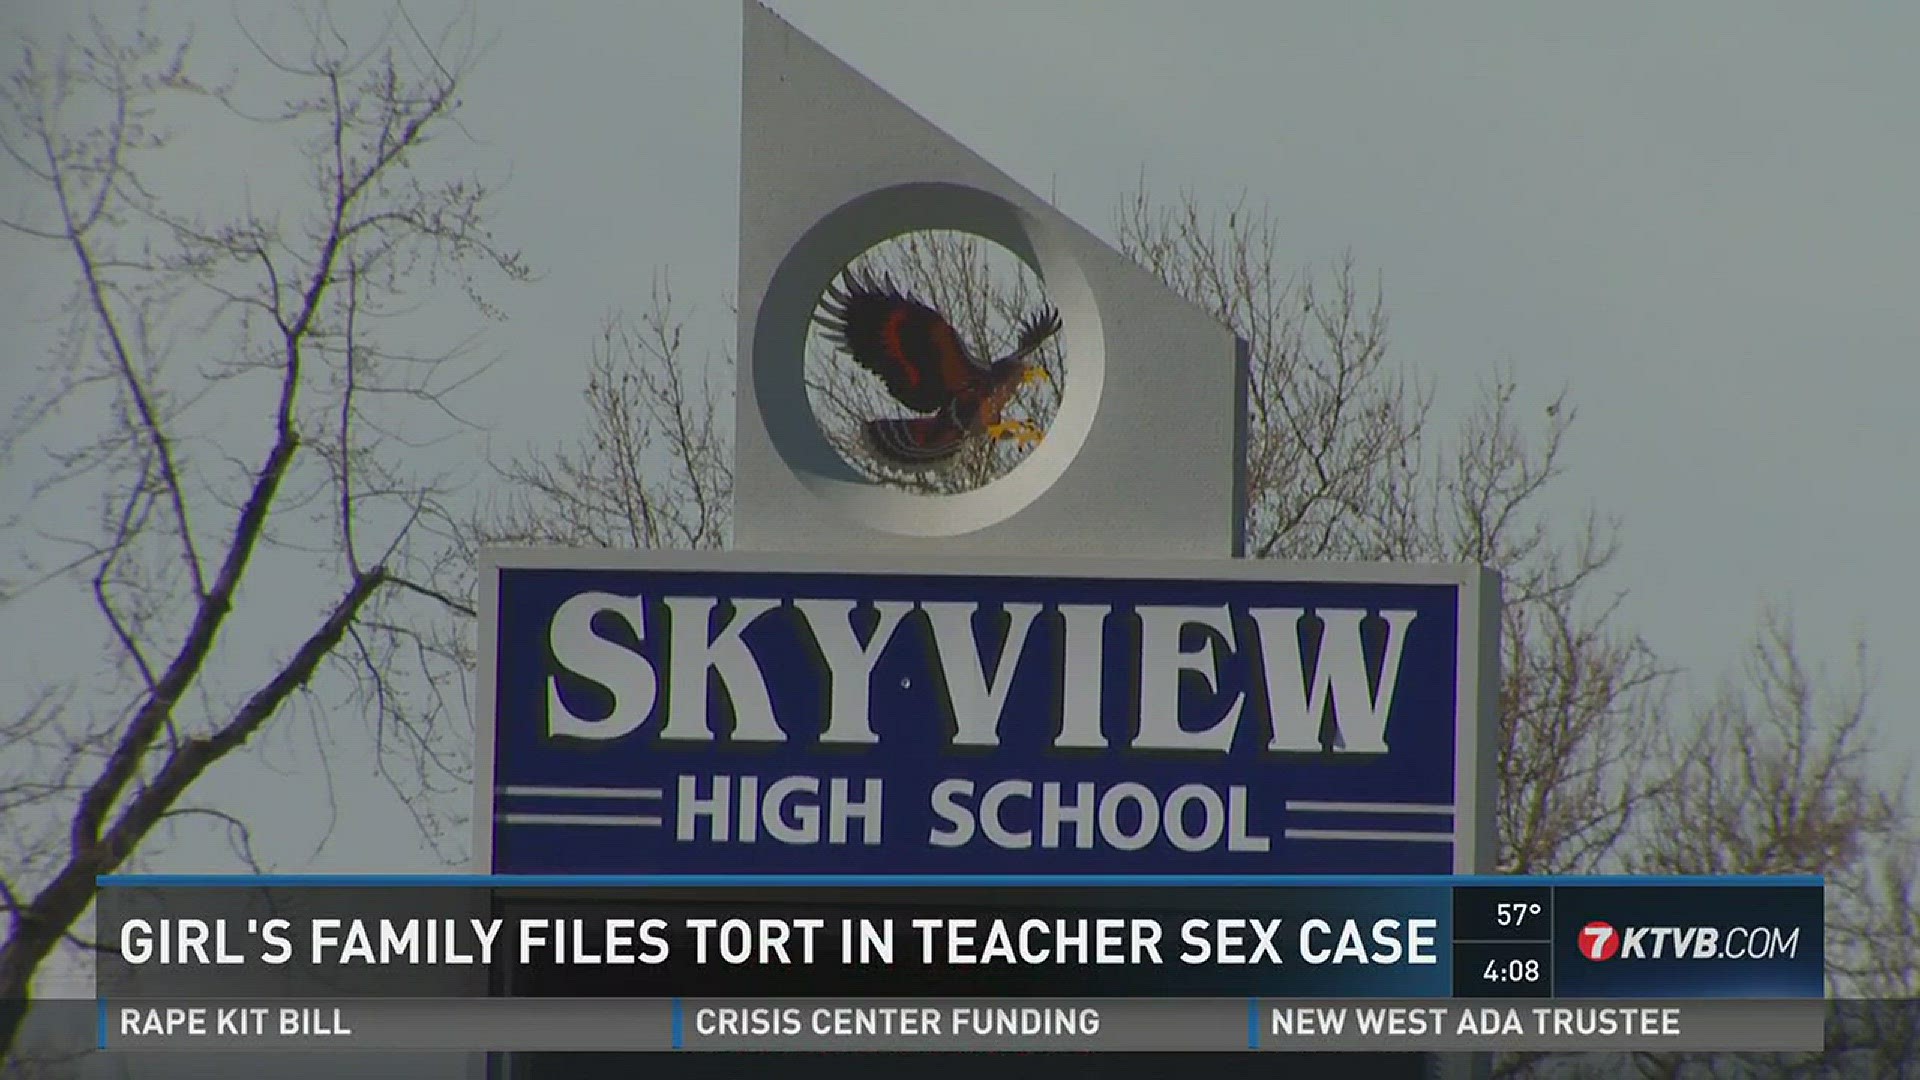 An attorney for the girl's family says the school district had been warned about the teacher.